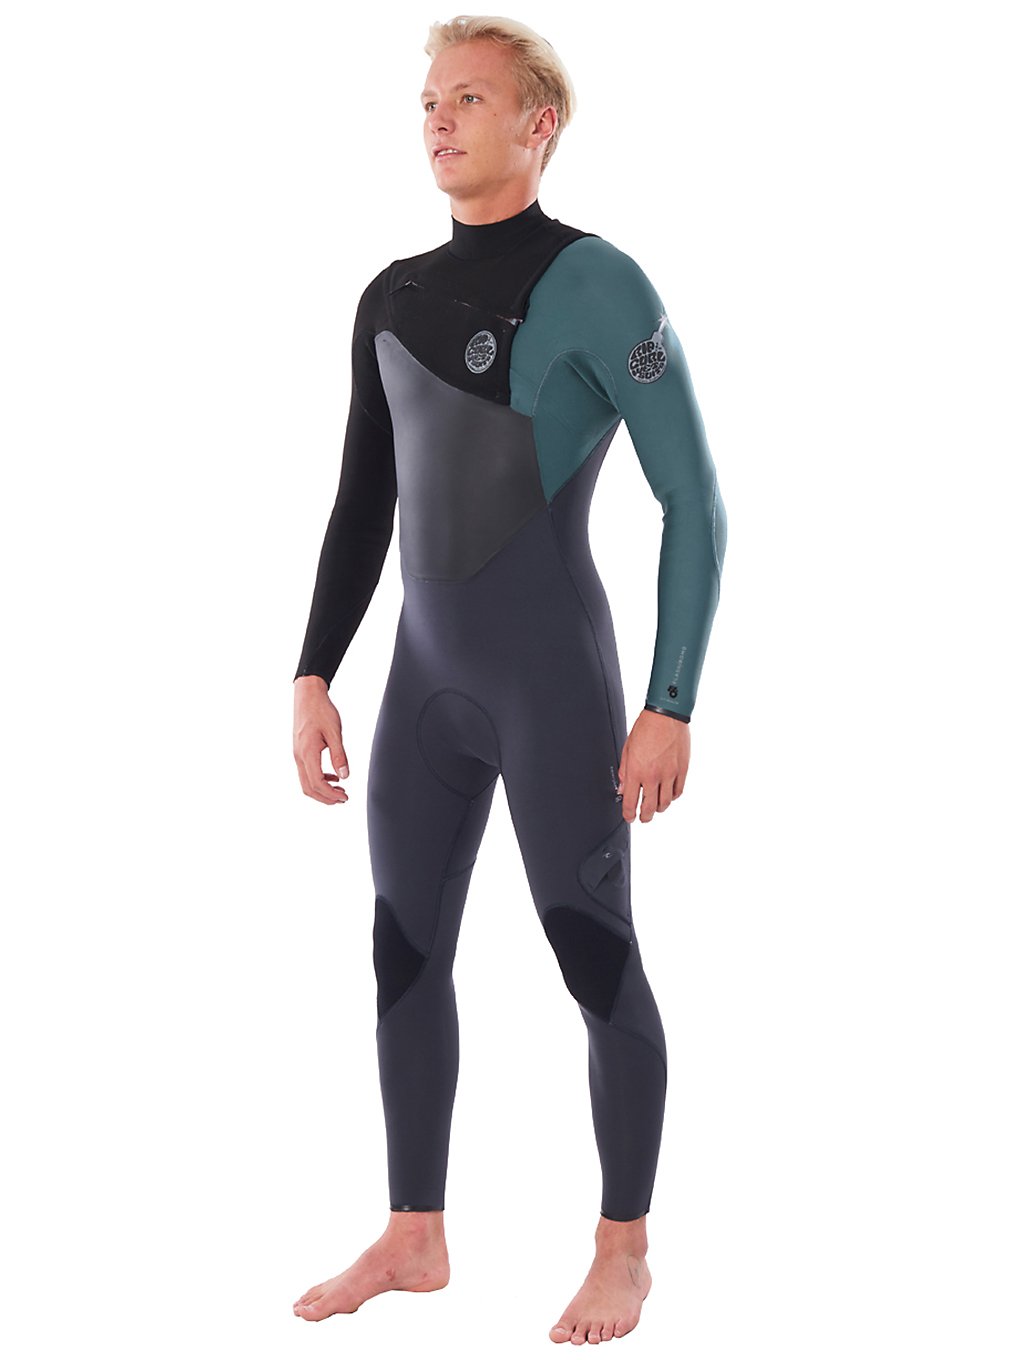 Rip Curl Flashbomb 3/2 GB Chest Zip Wetsuit green